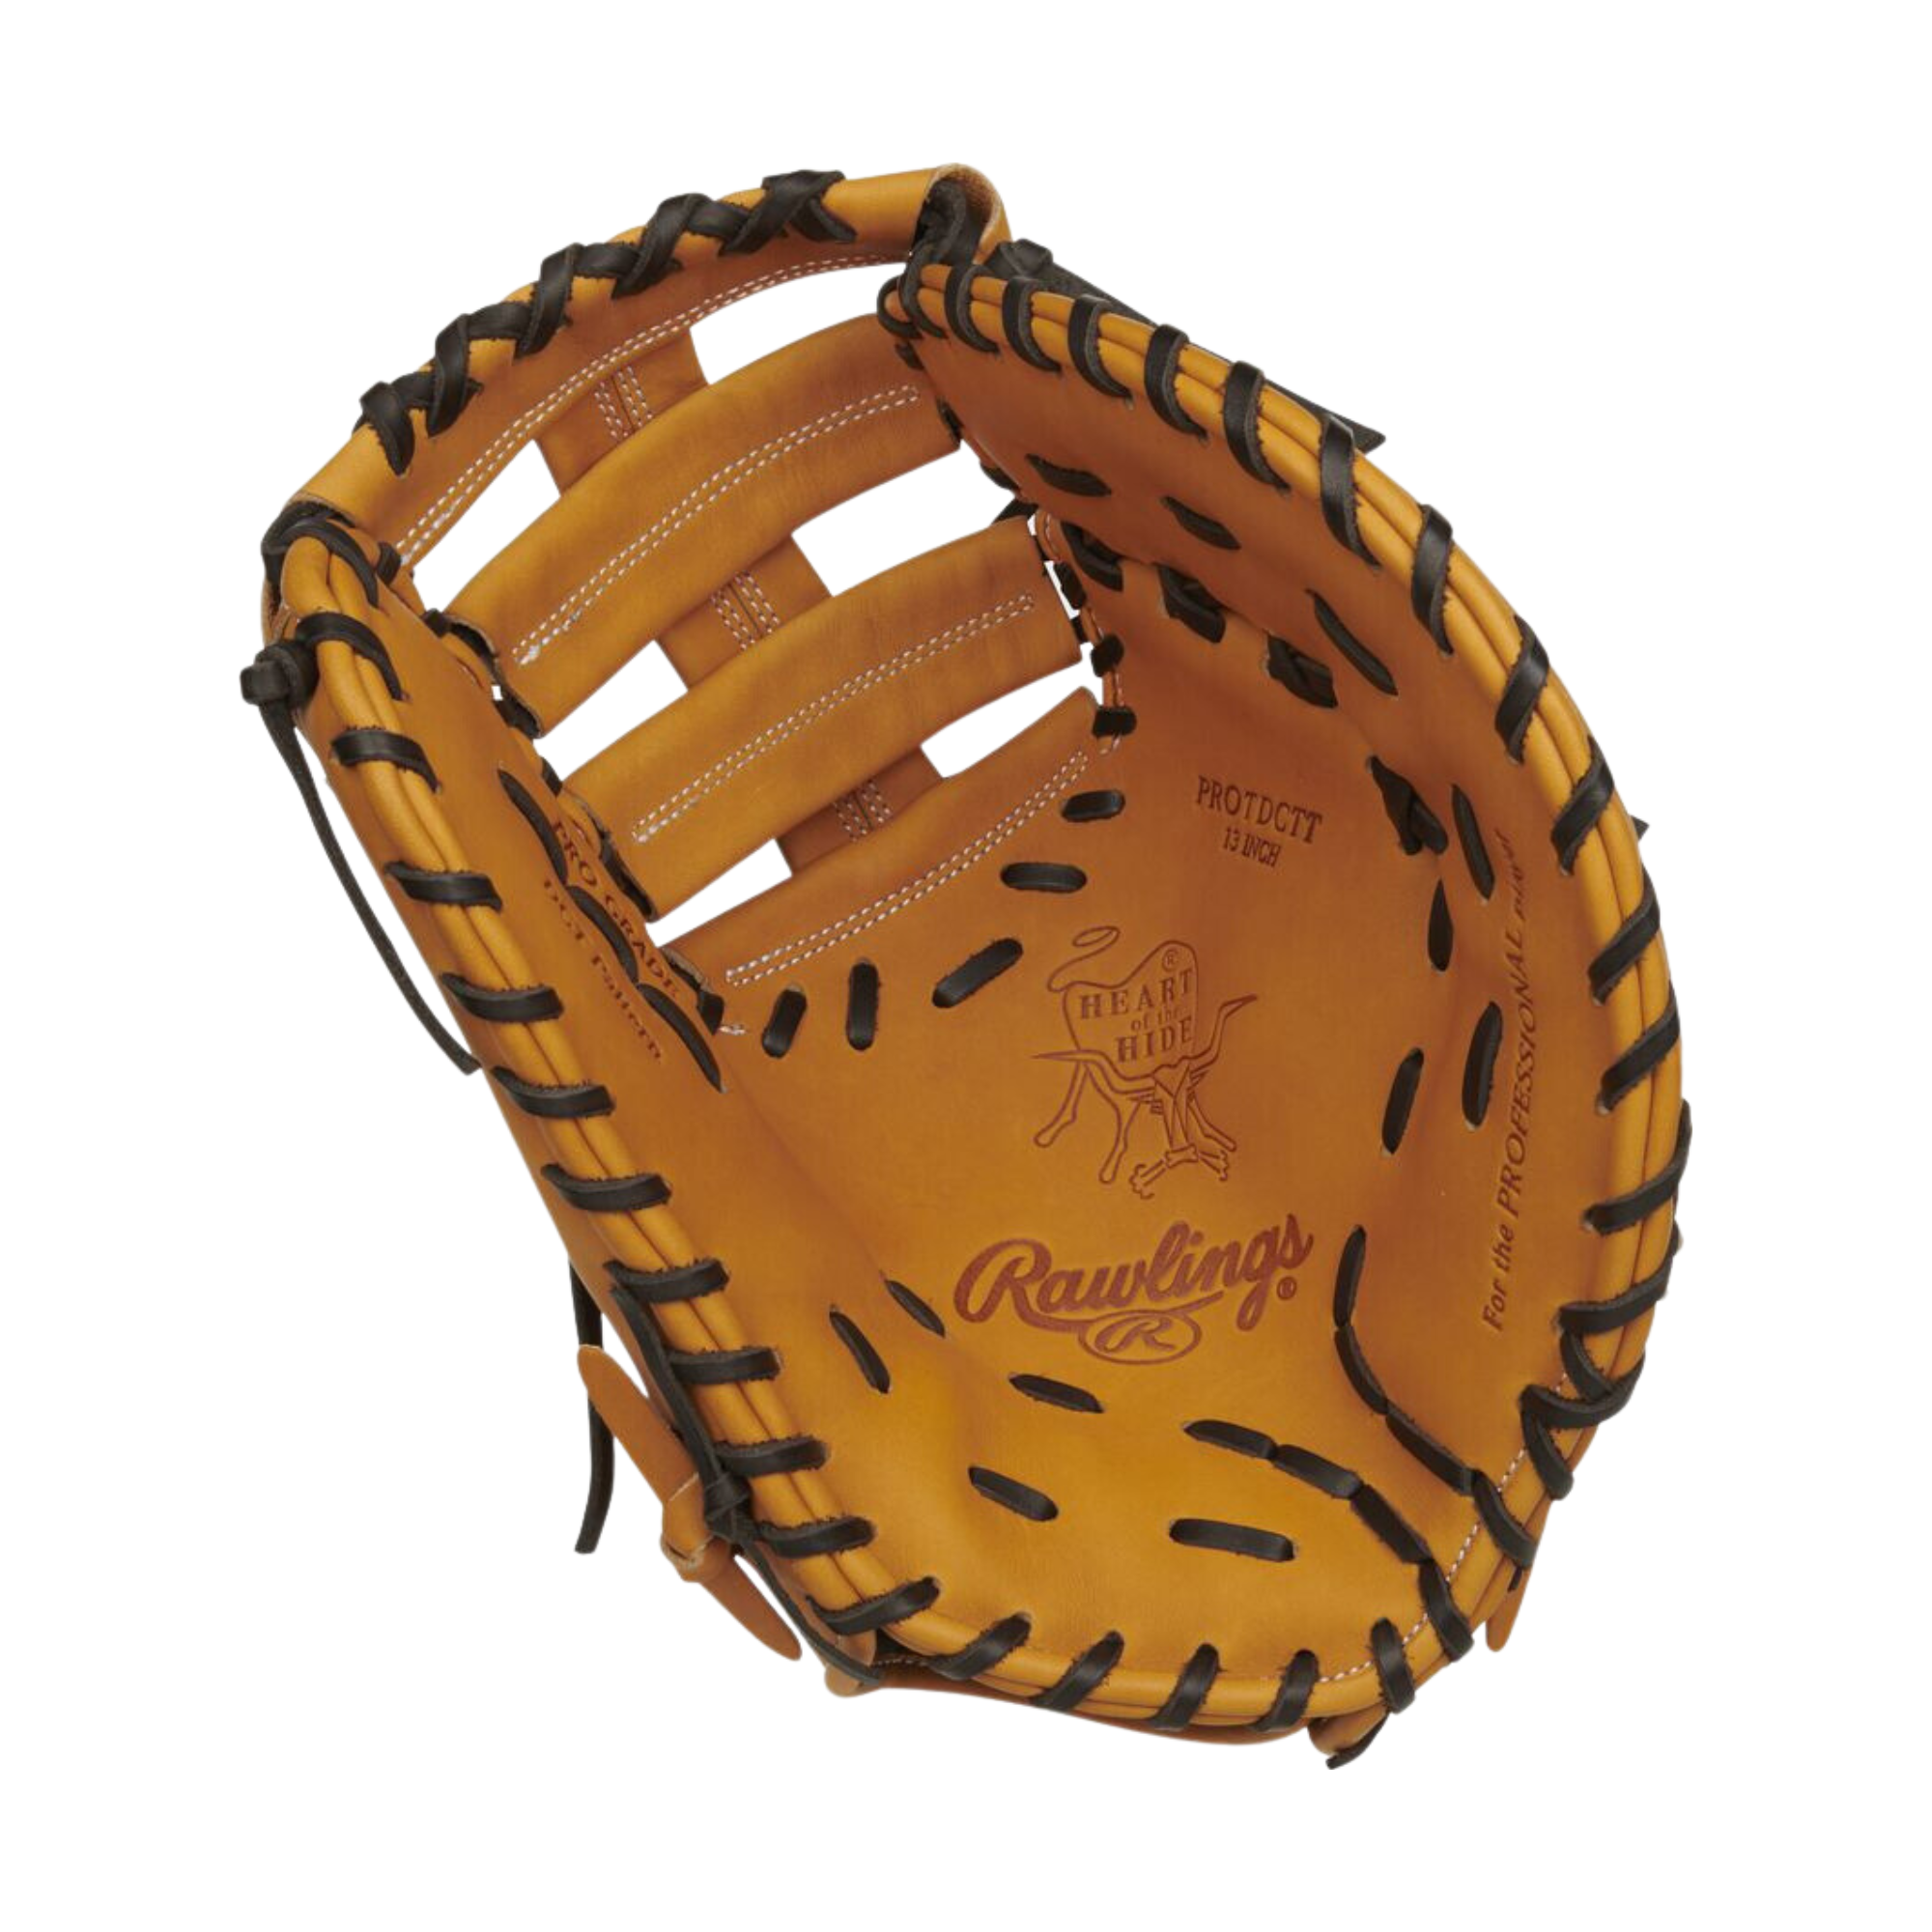 Rawlings Heart Of The Hide Traditional Series First Base Mitt Baseball Glove 13 LHT